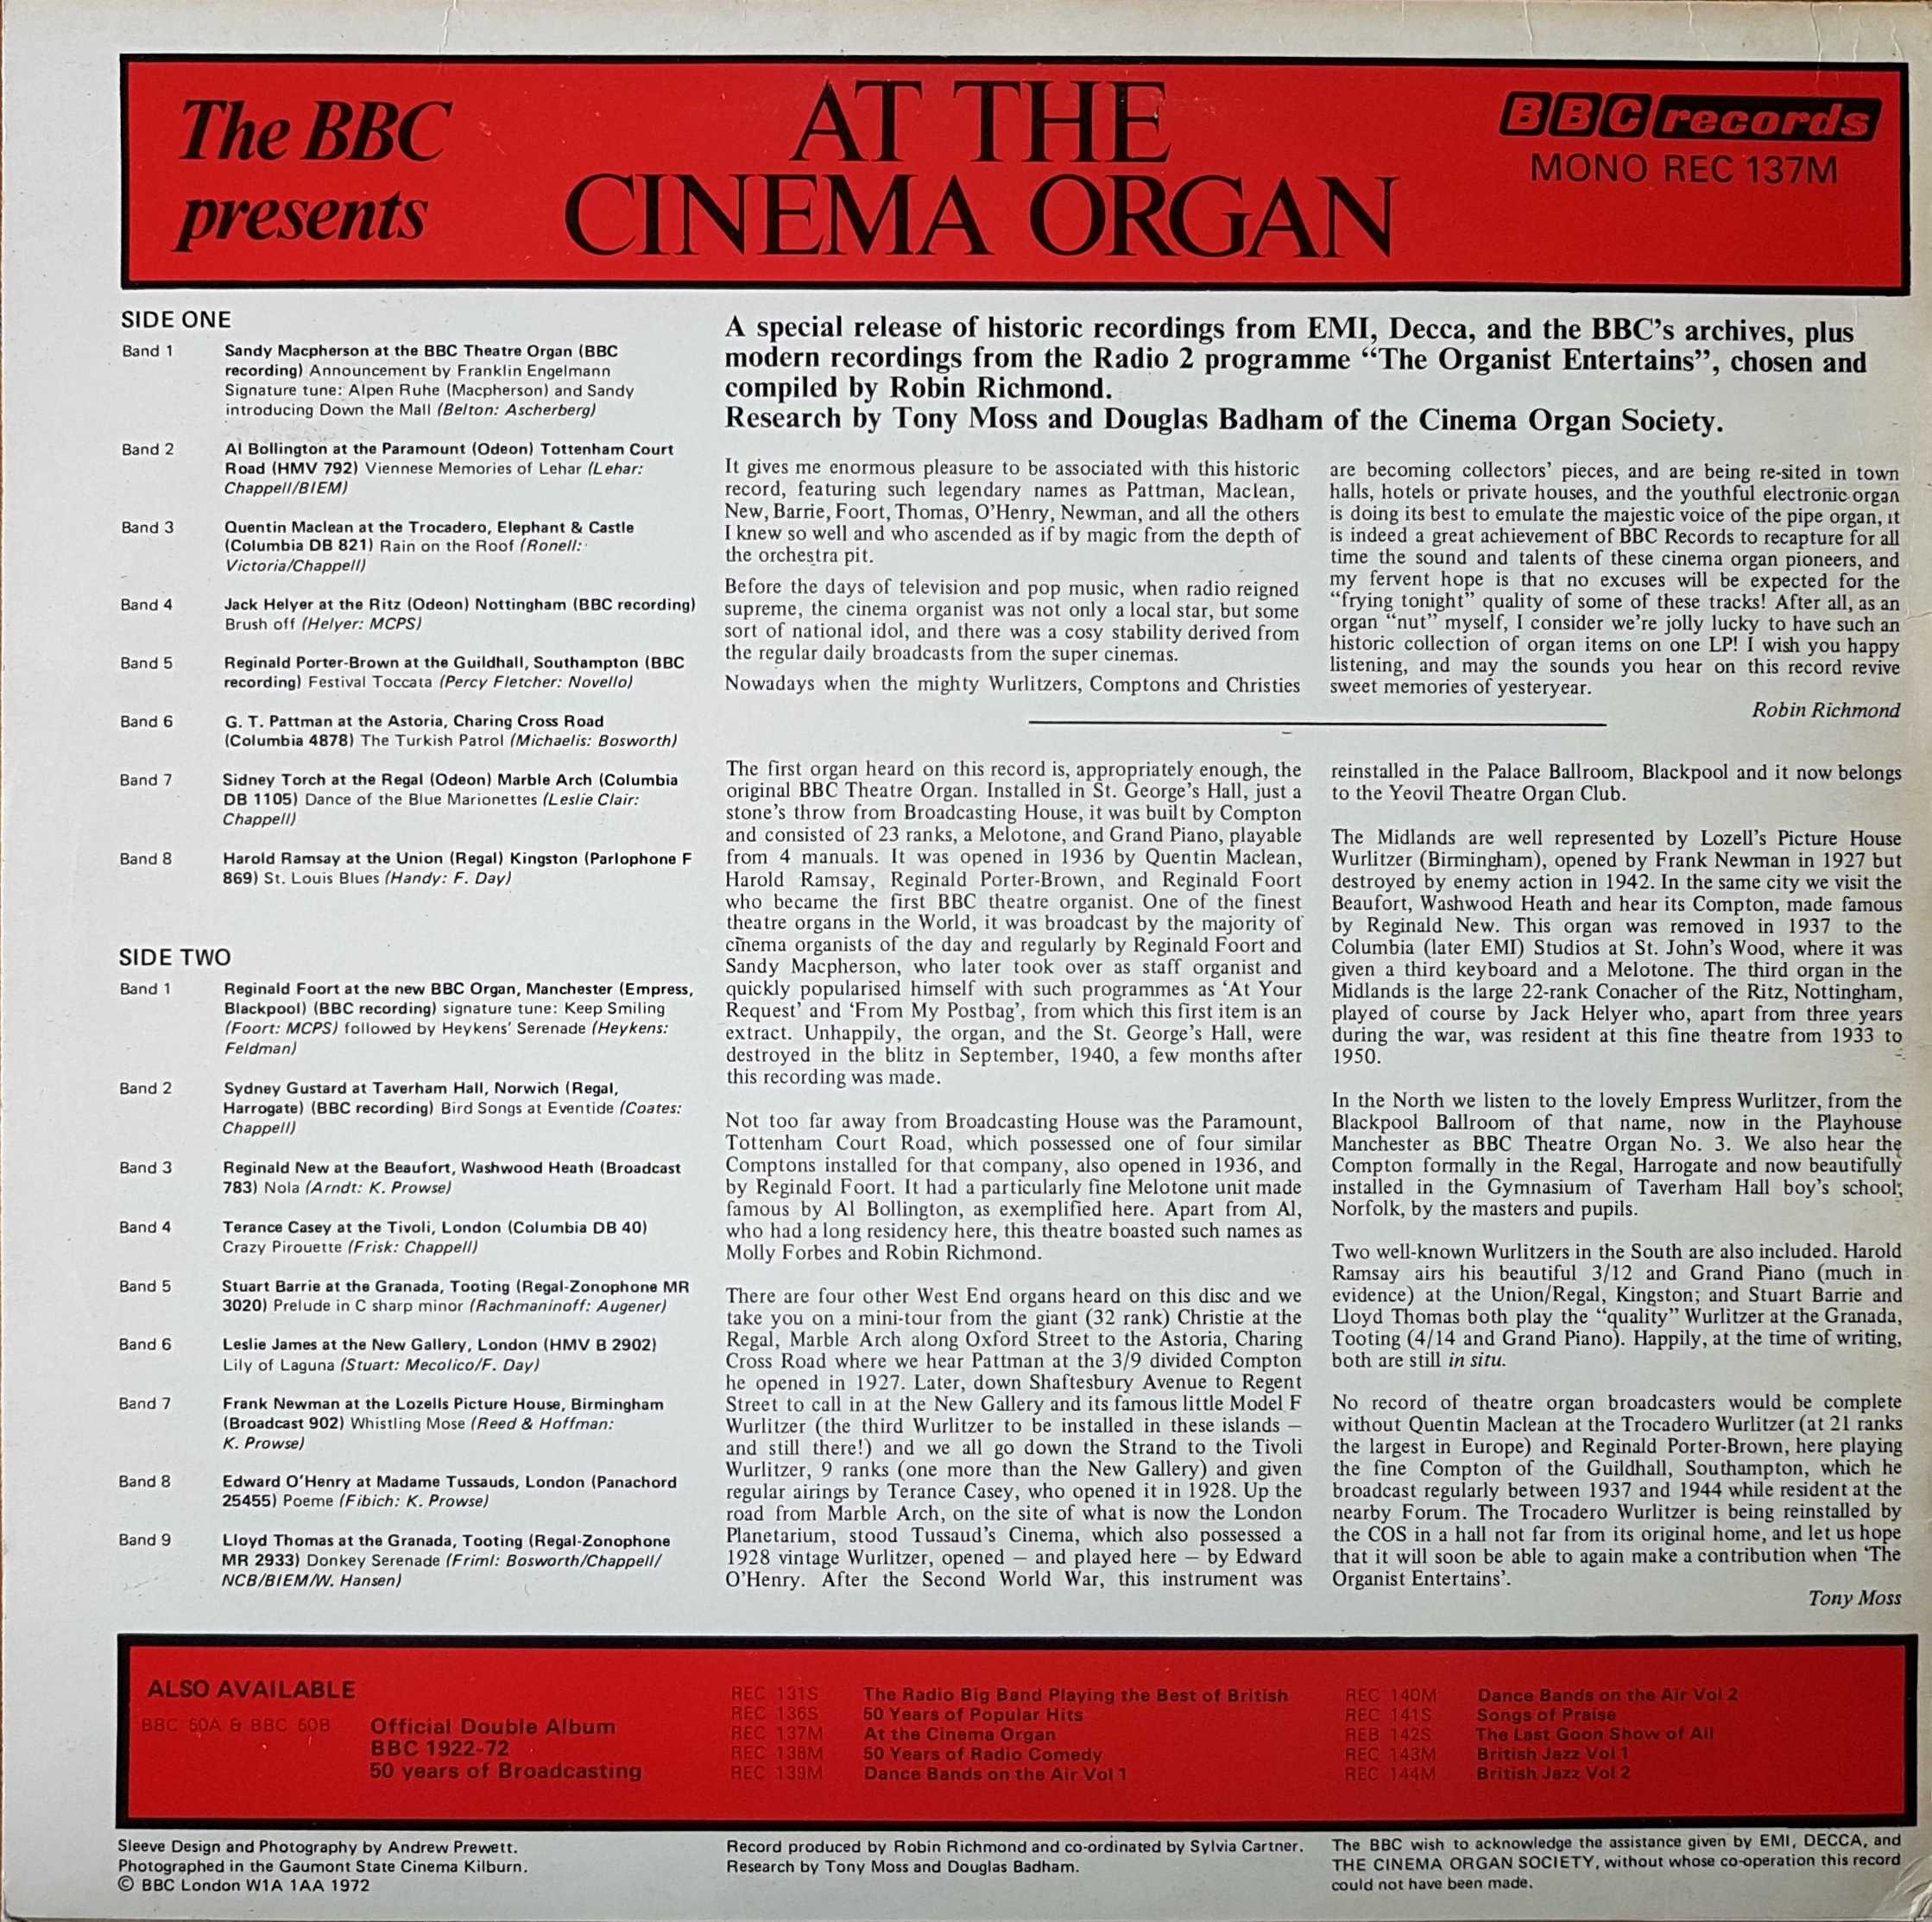 Picture of REC 137 At the cinema organ by artist Various from the BBC records and Tapes library